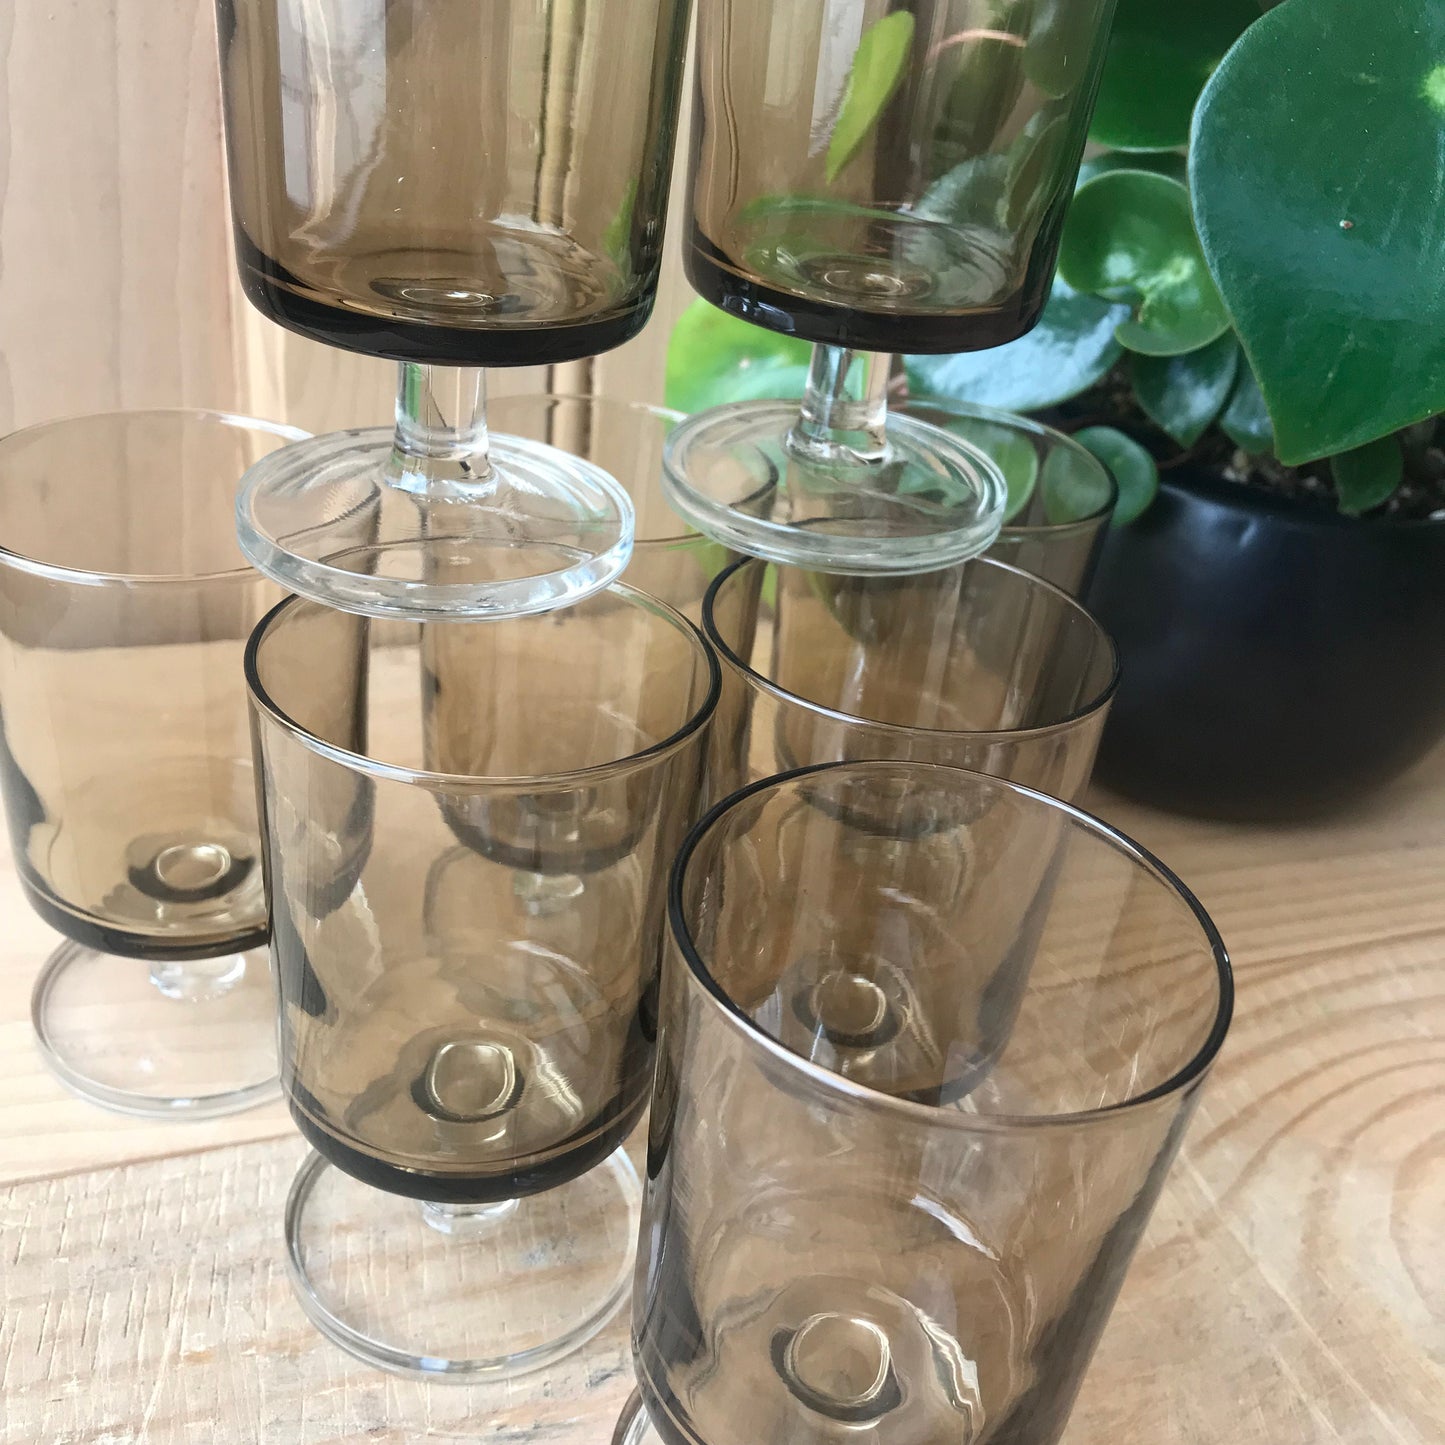 Eight vintage French aperitif glasses